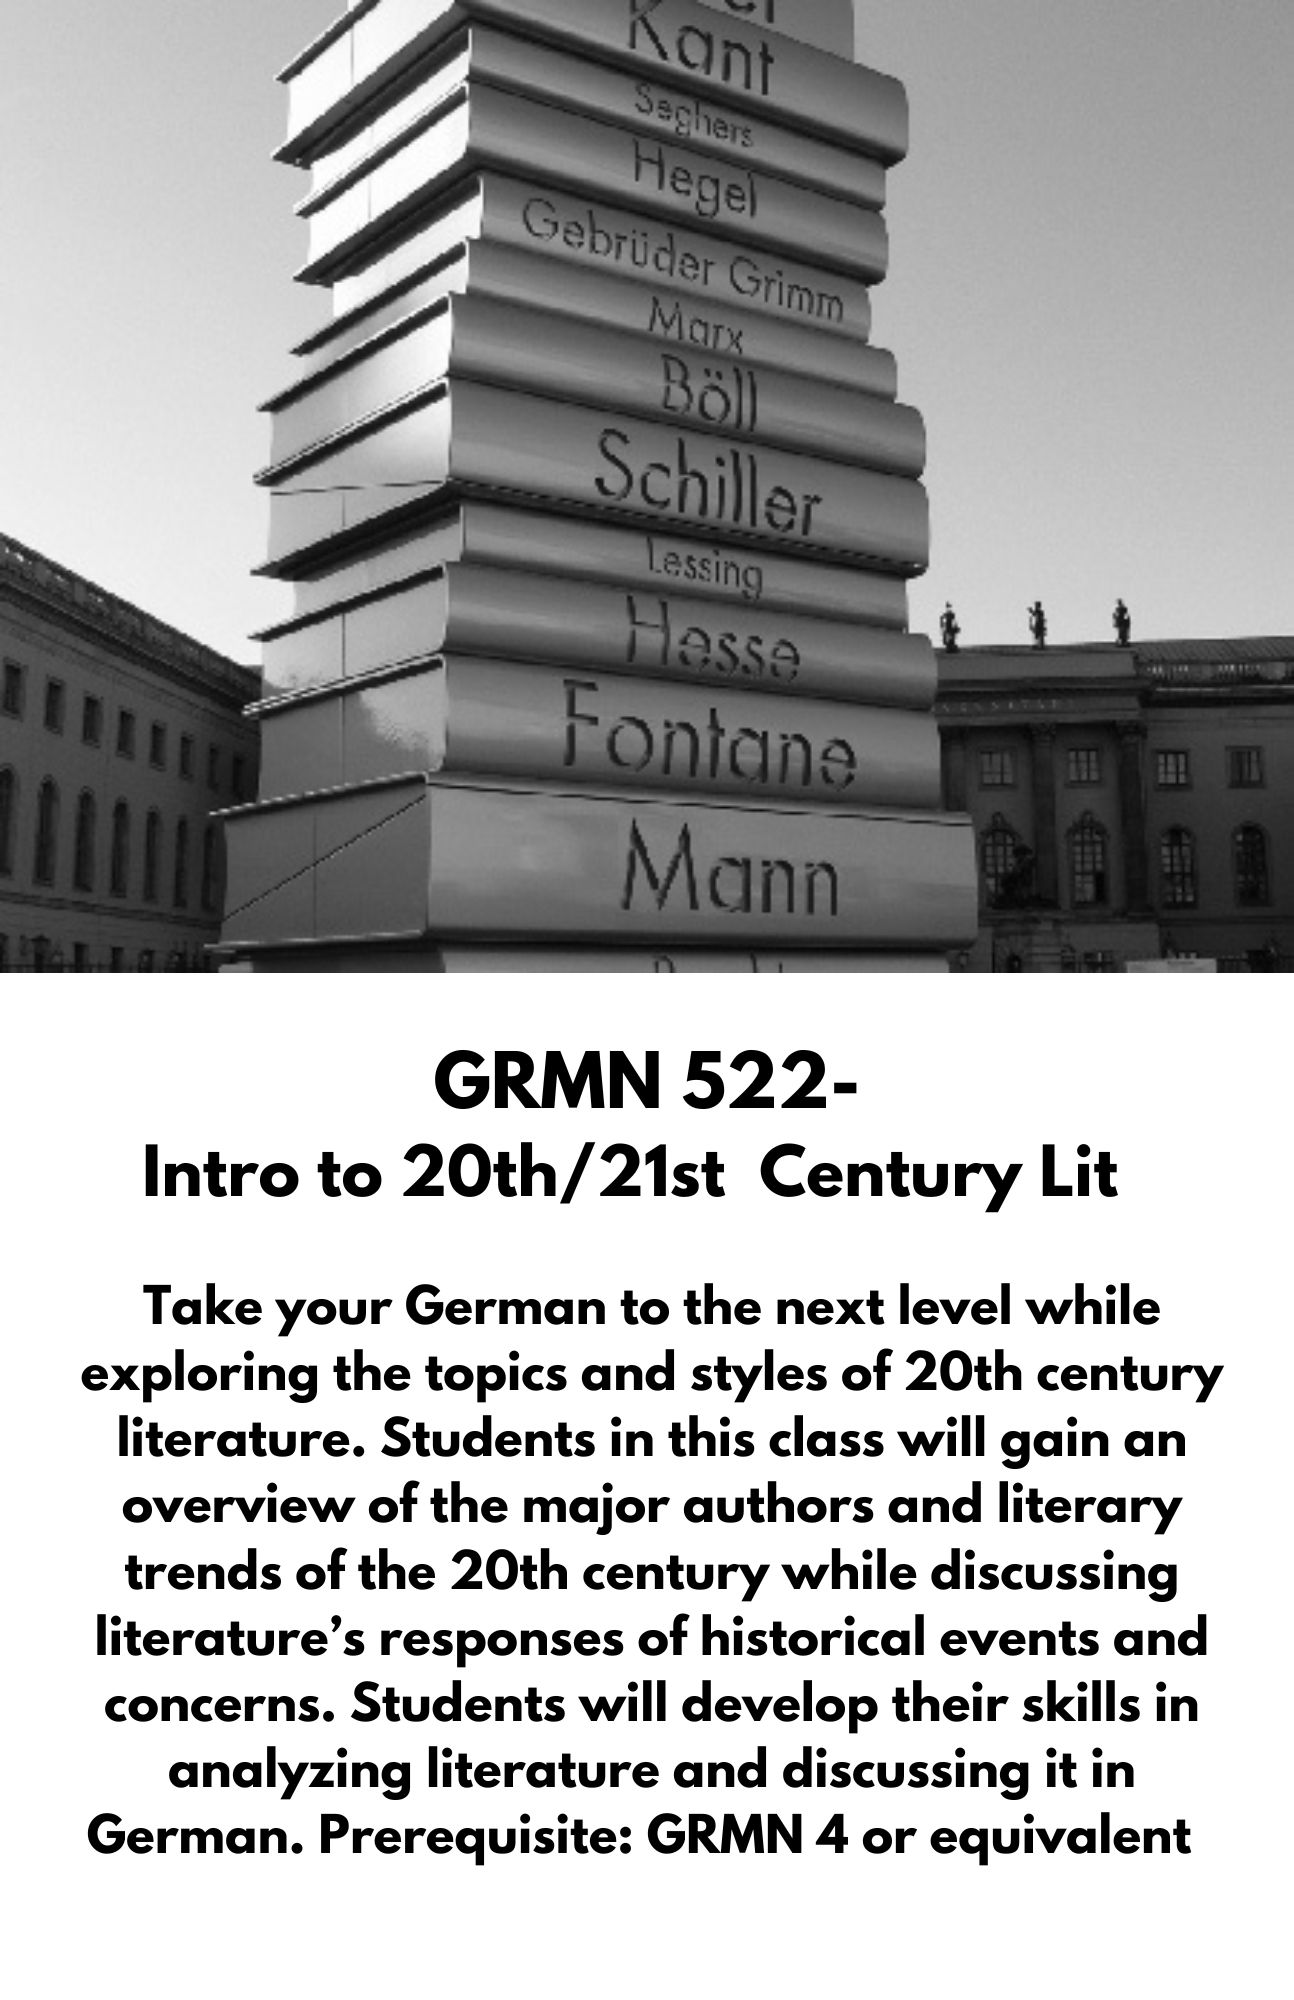 GRMN 522- Intro to 20th/21st  Century Lit. Take your German to the next level while exploring the topics and styles of 20th century literature. Students in this class will gain an overview of the major authors and literary trends of the 20th century while discussing literature’s responses of historical events and concerns. Students will develop their skills in analyzing literature and discussing it in German. Prerequisite: GRMN 4 or equivalent